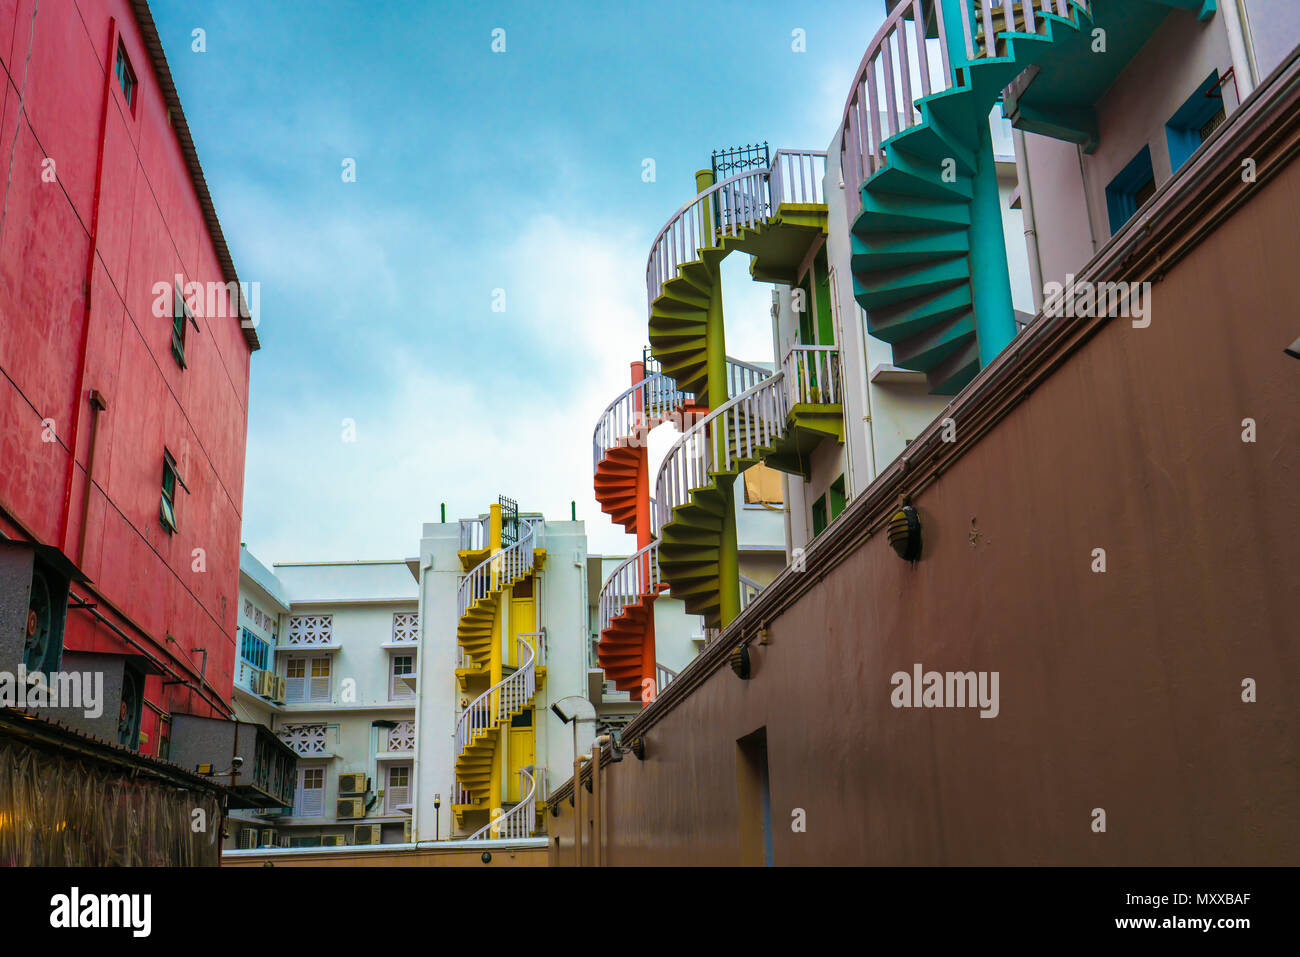 back alley in bugis with colorful stairways. Stock Photo